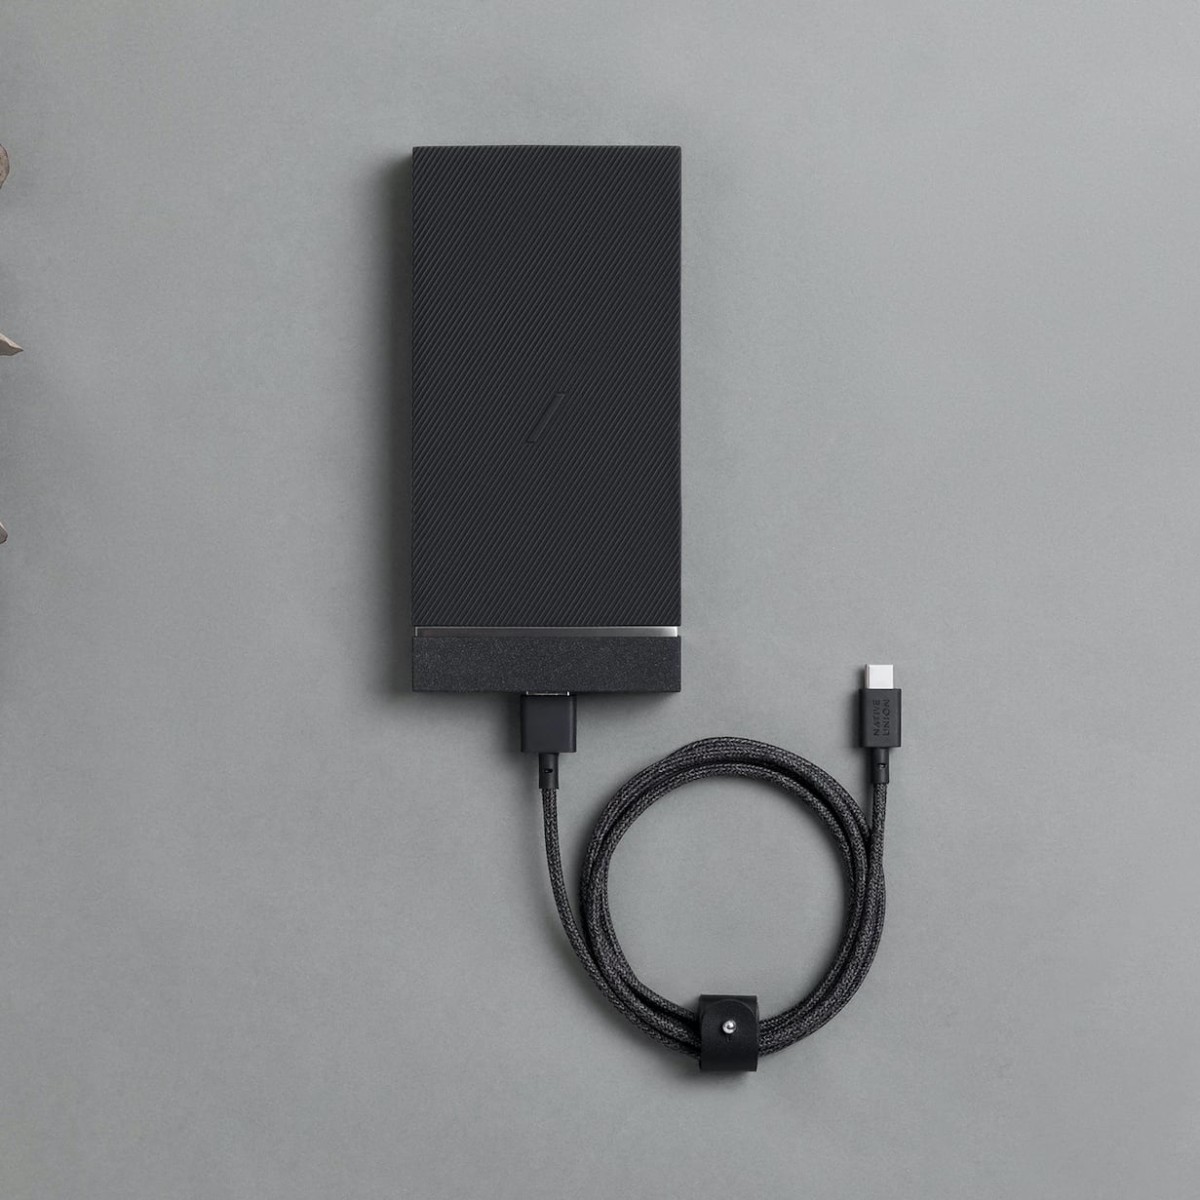 Native Union Jump+ Wireless Powerbank offers up to 12,000 mAh of battery capacity